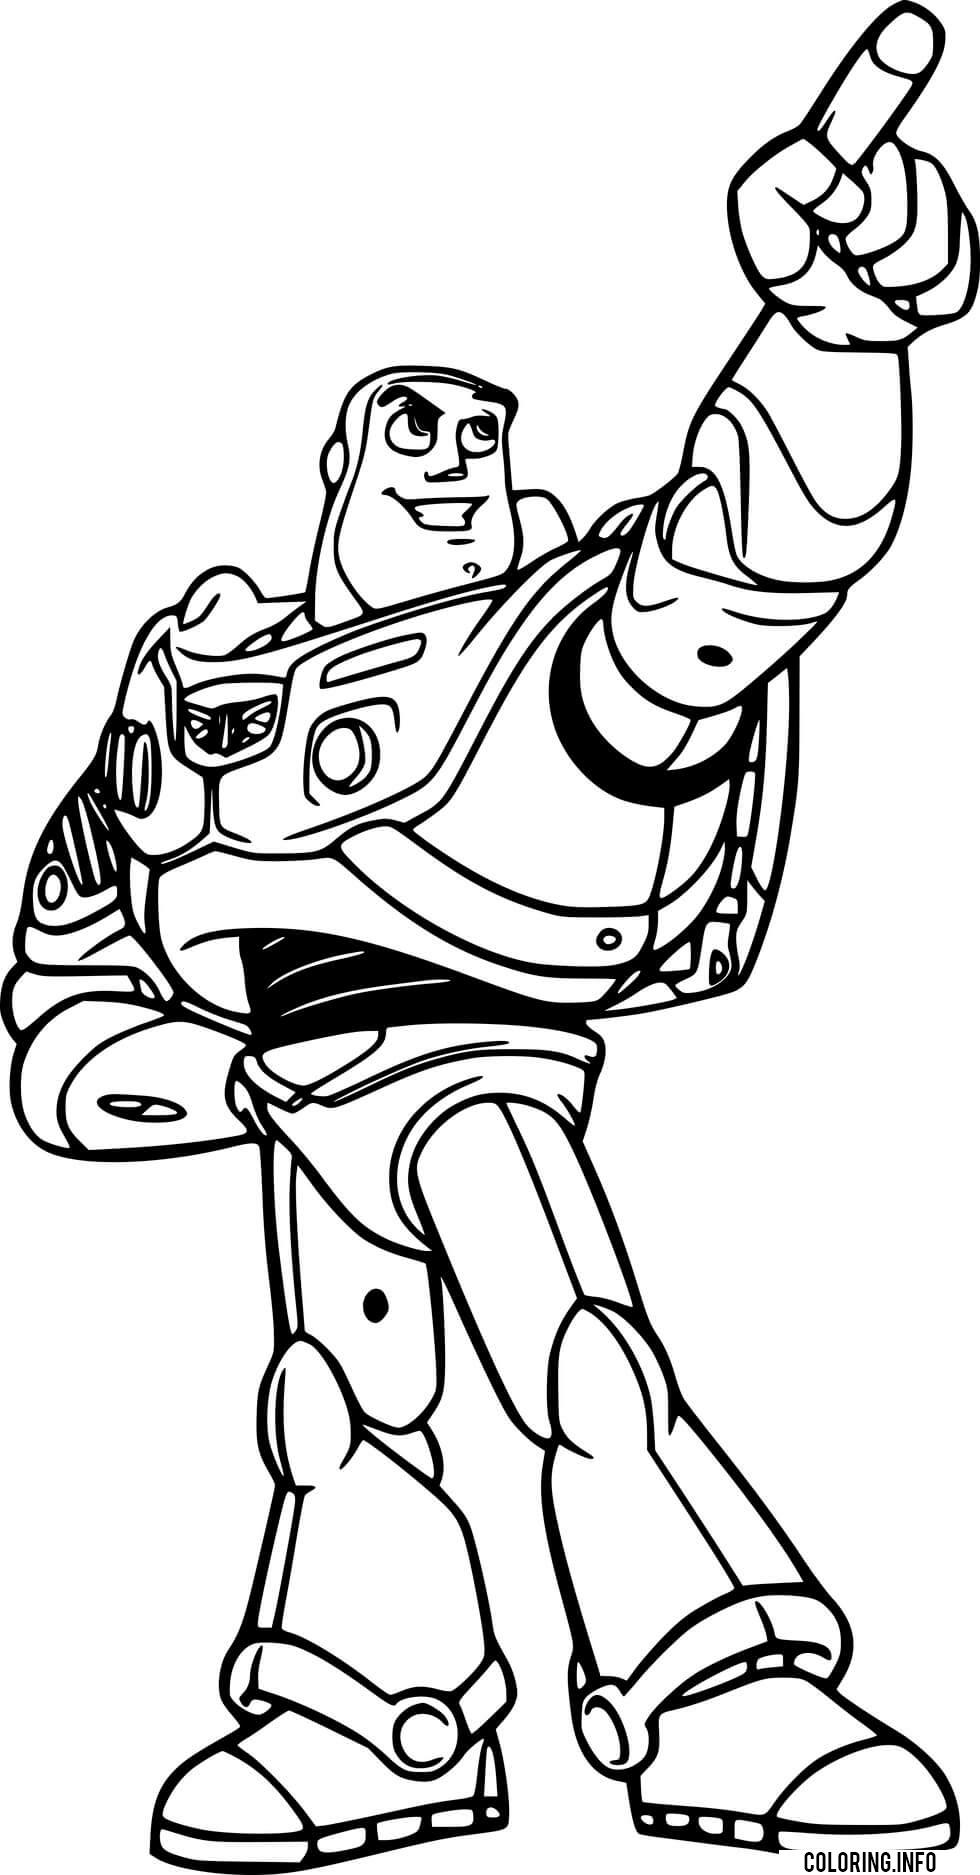 Buzz Lightyear Pointing coloring